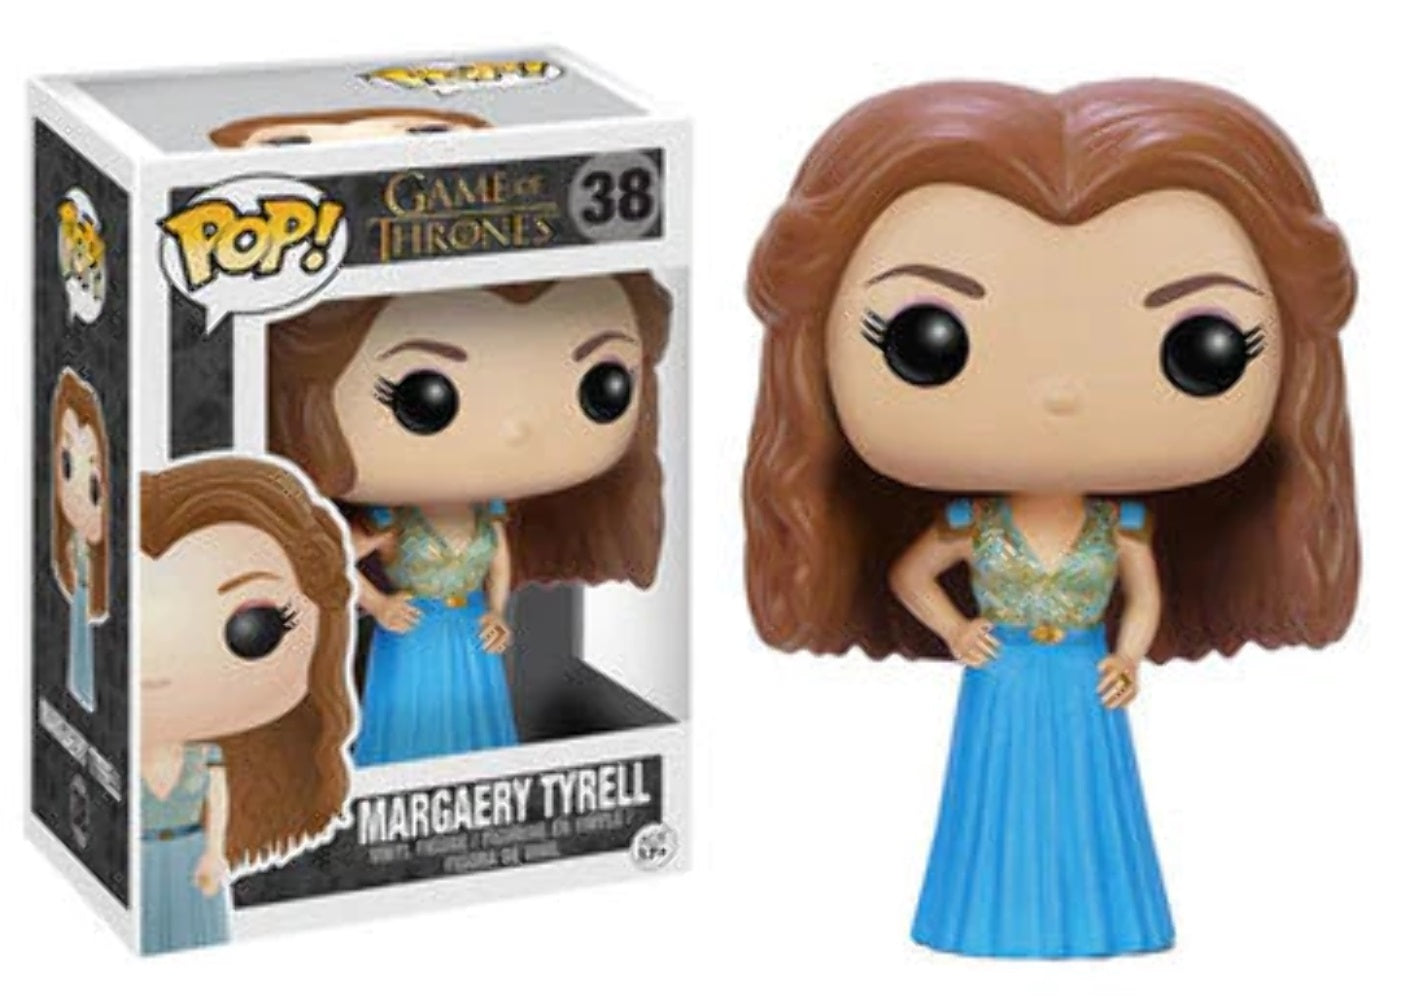 FUNKO POP! GAME OF THRONES MARGAERY TYRELL #38 TV VINYL FIGURE TOY - Anotoys Collectibles